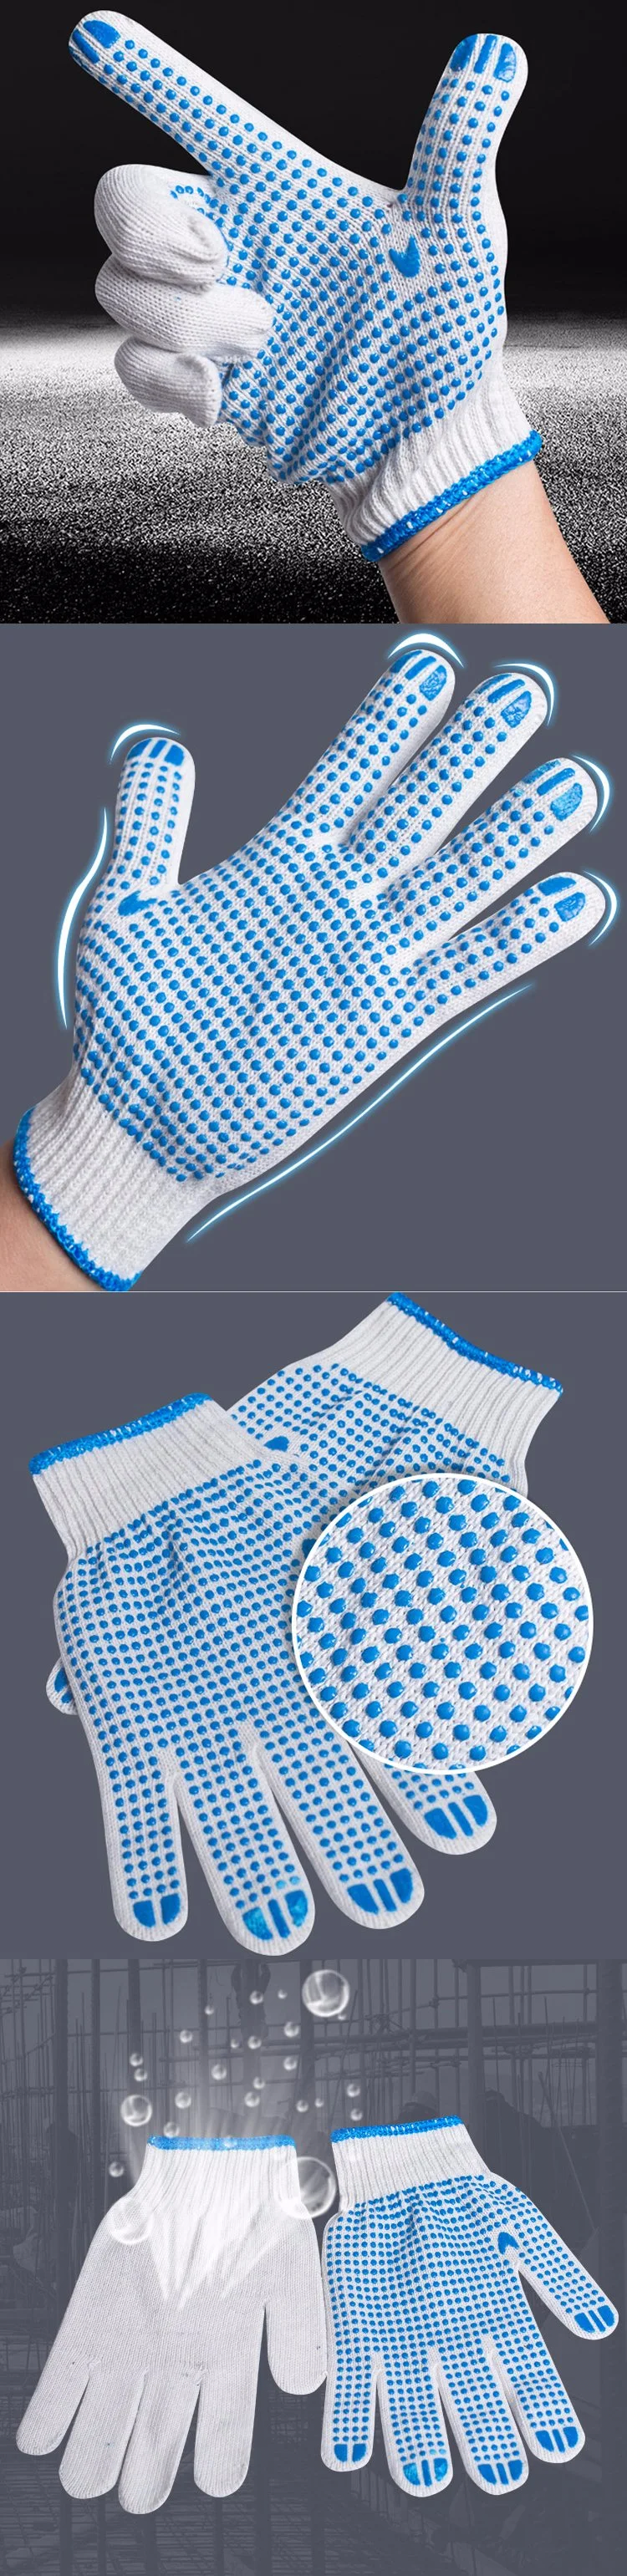 Blue Cotton /Polyester Knit Knitted Garden Work Gloves with PVC Dots, Gripper DOT Gloves